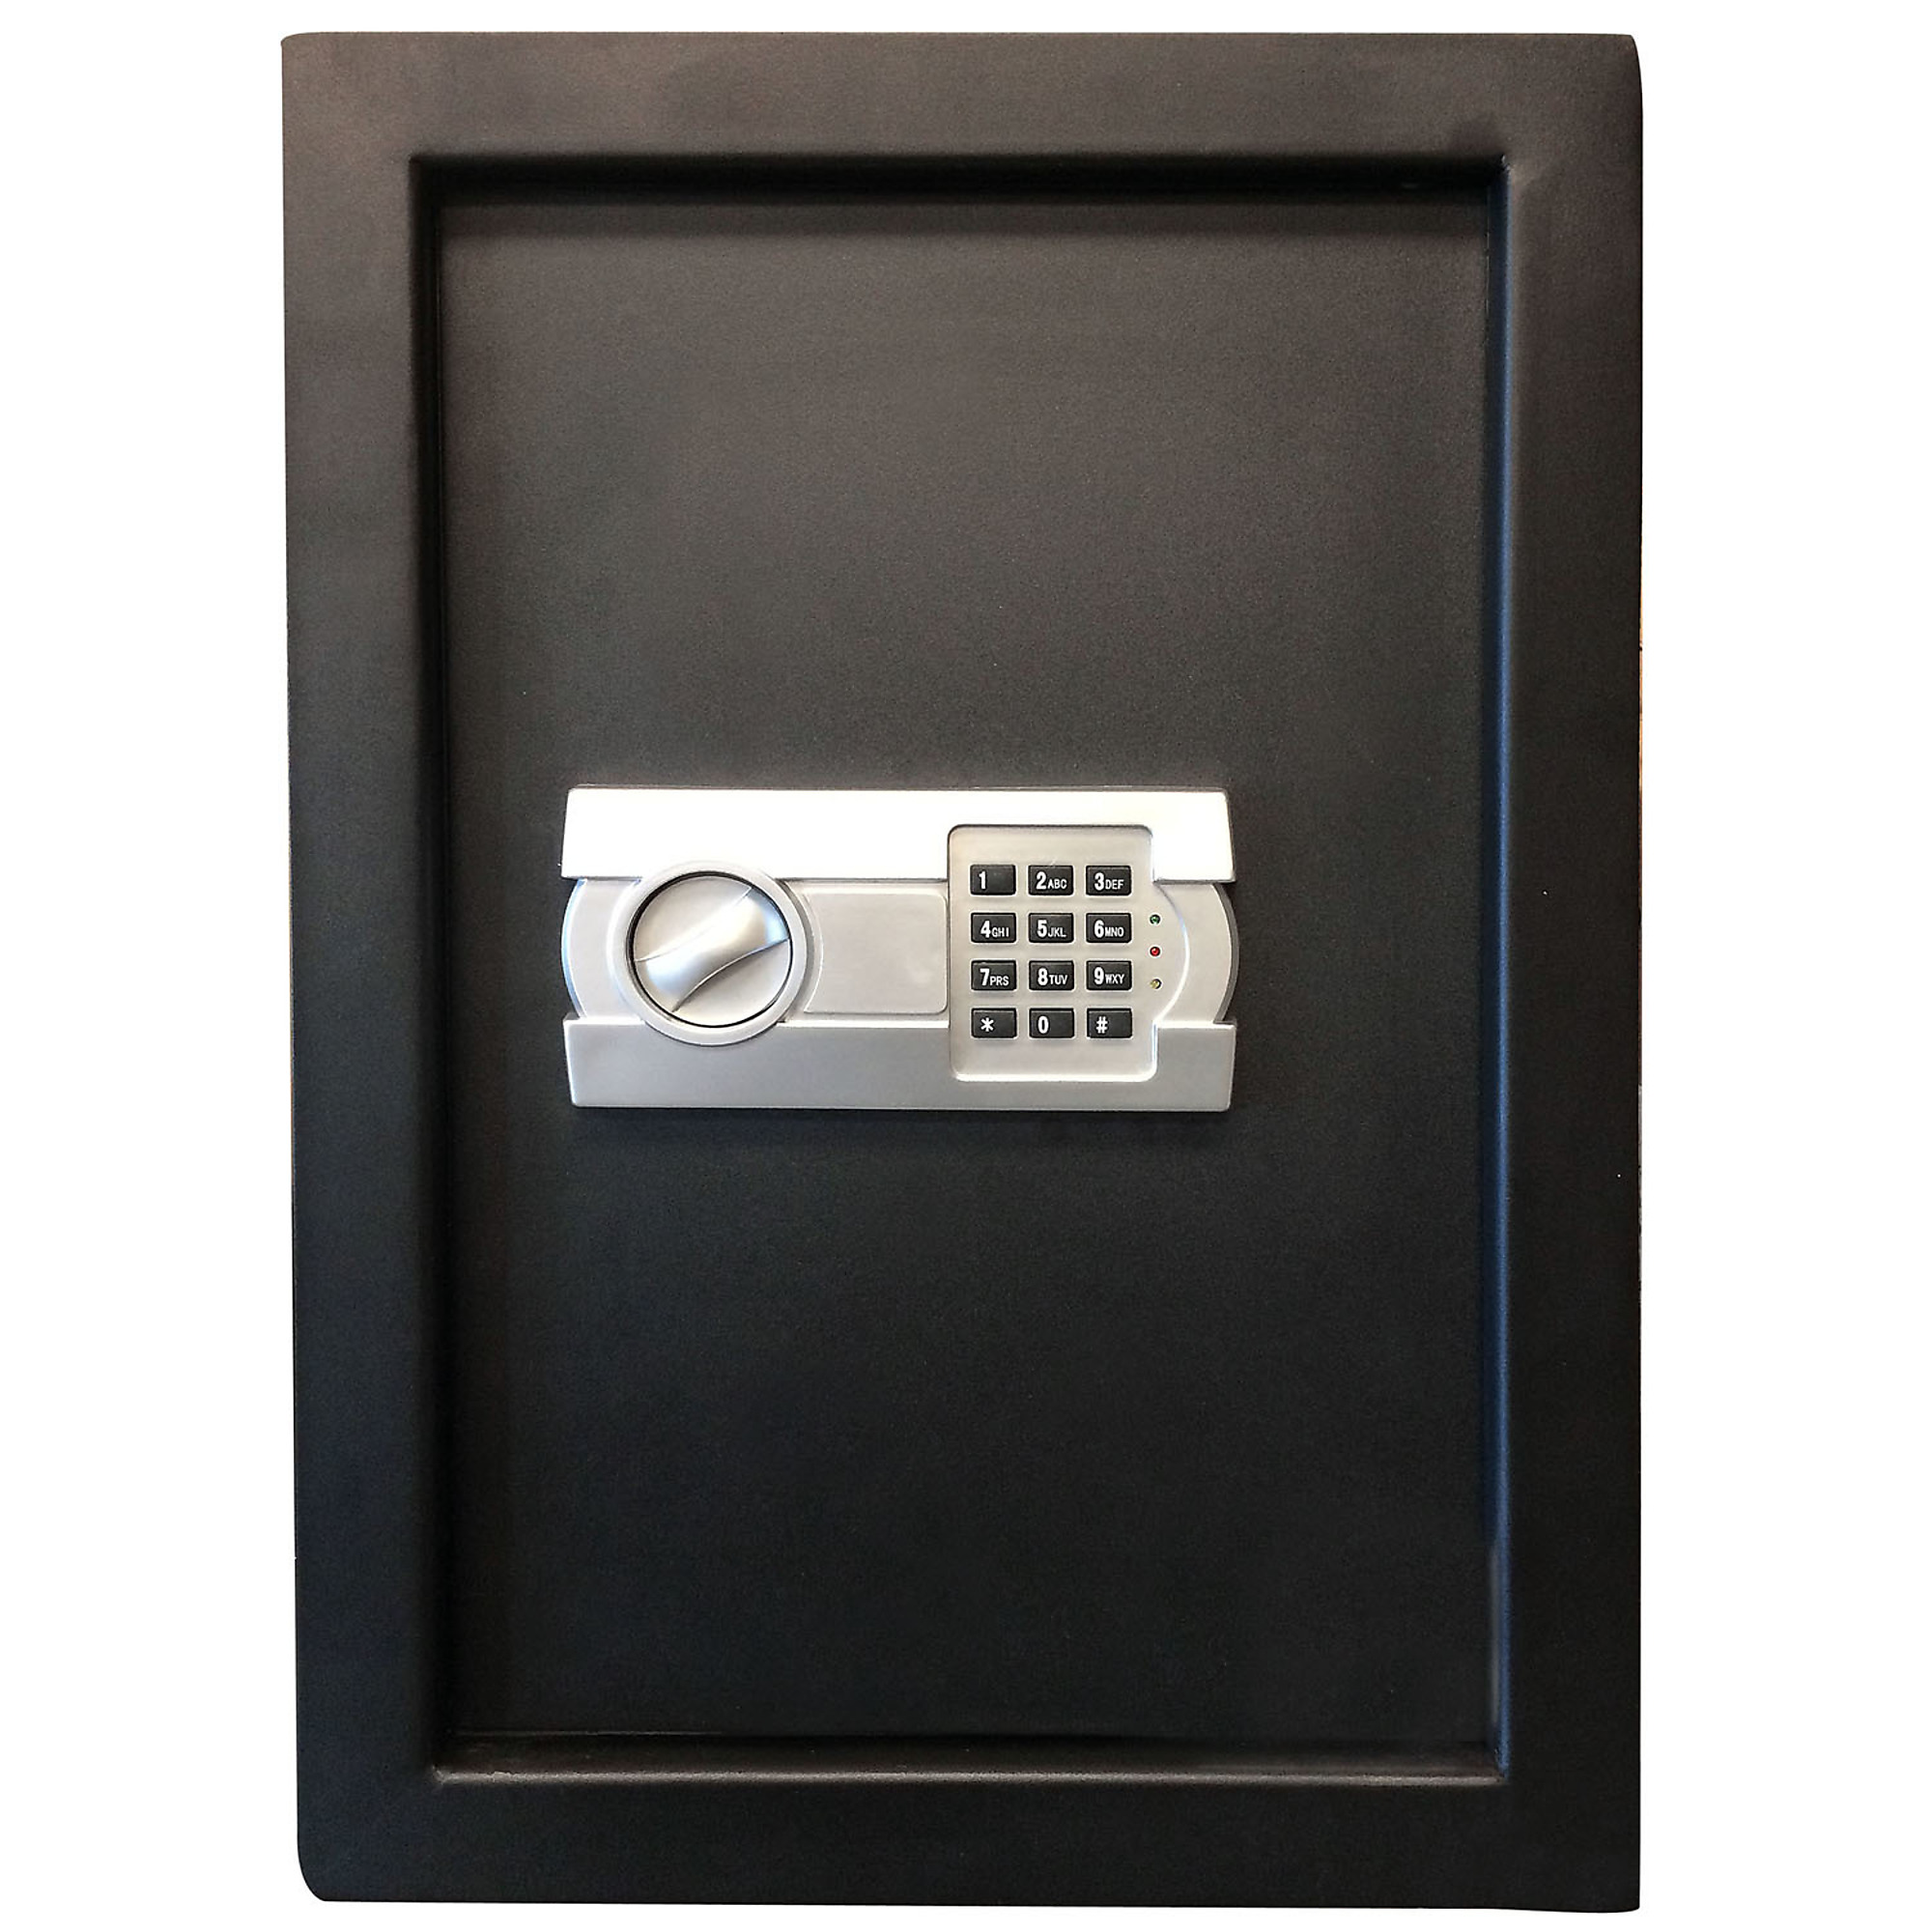 Sportsman Series, Wall Safe with Electronic Lock - Black, Capacity 0.6 ftÂ³, Lock Type Electronic, Model WALLSAFE